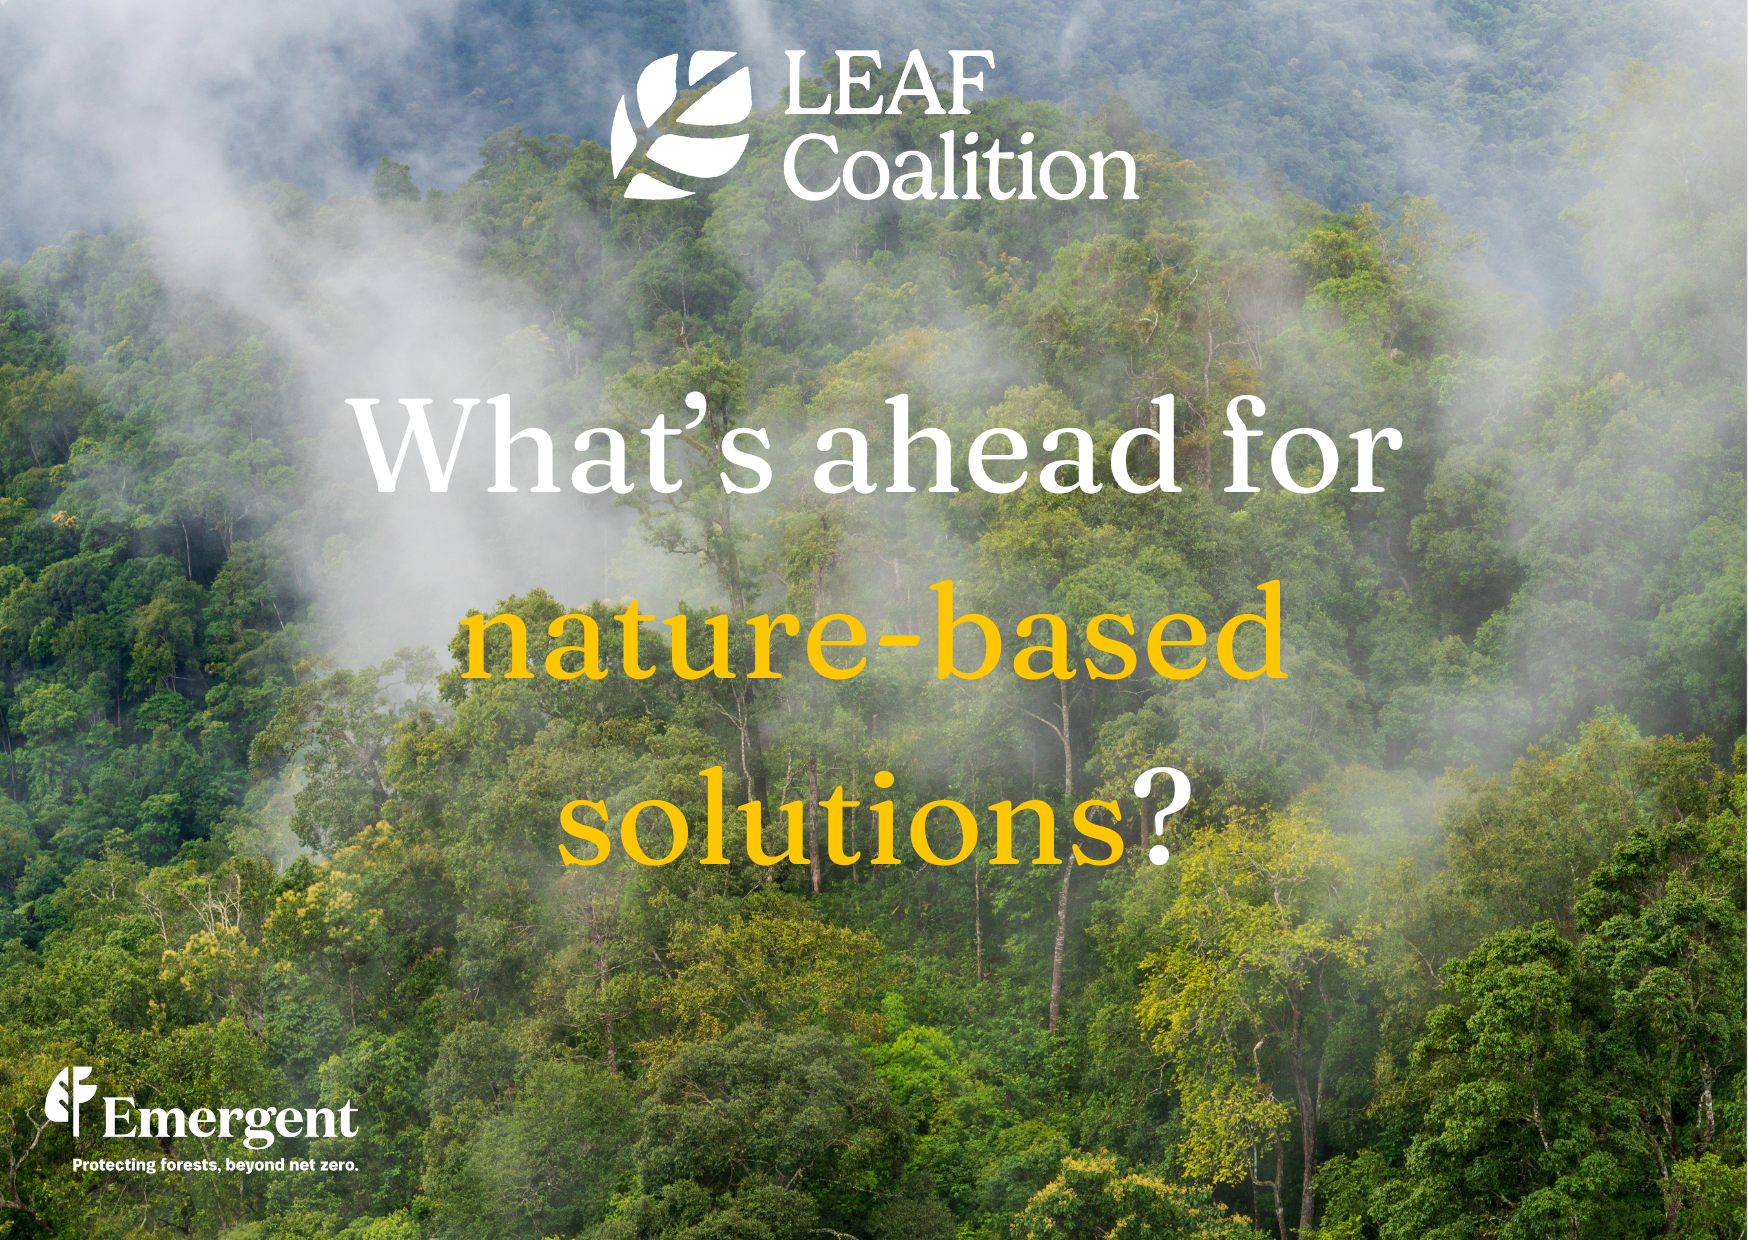 What’s ahead for nature-based solutions?